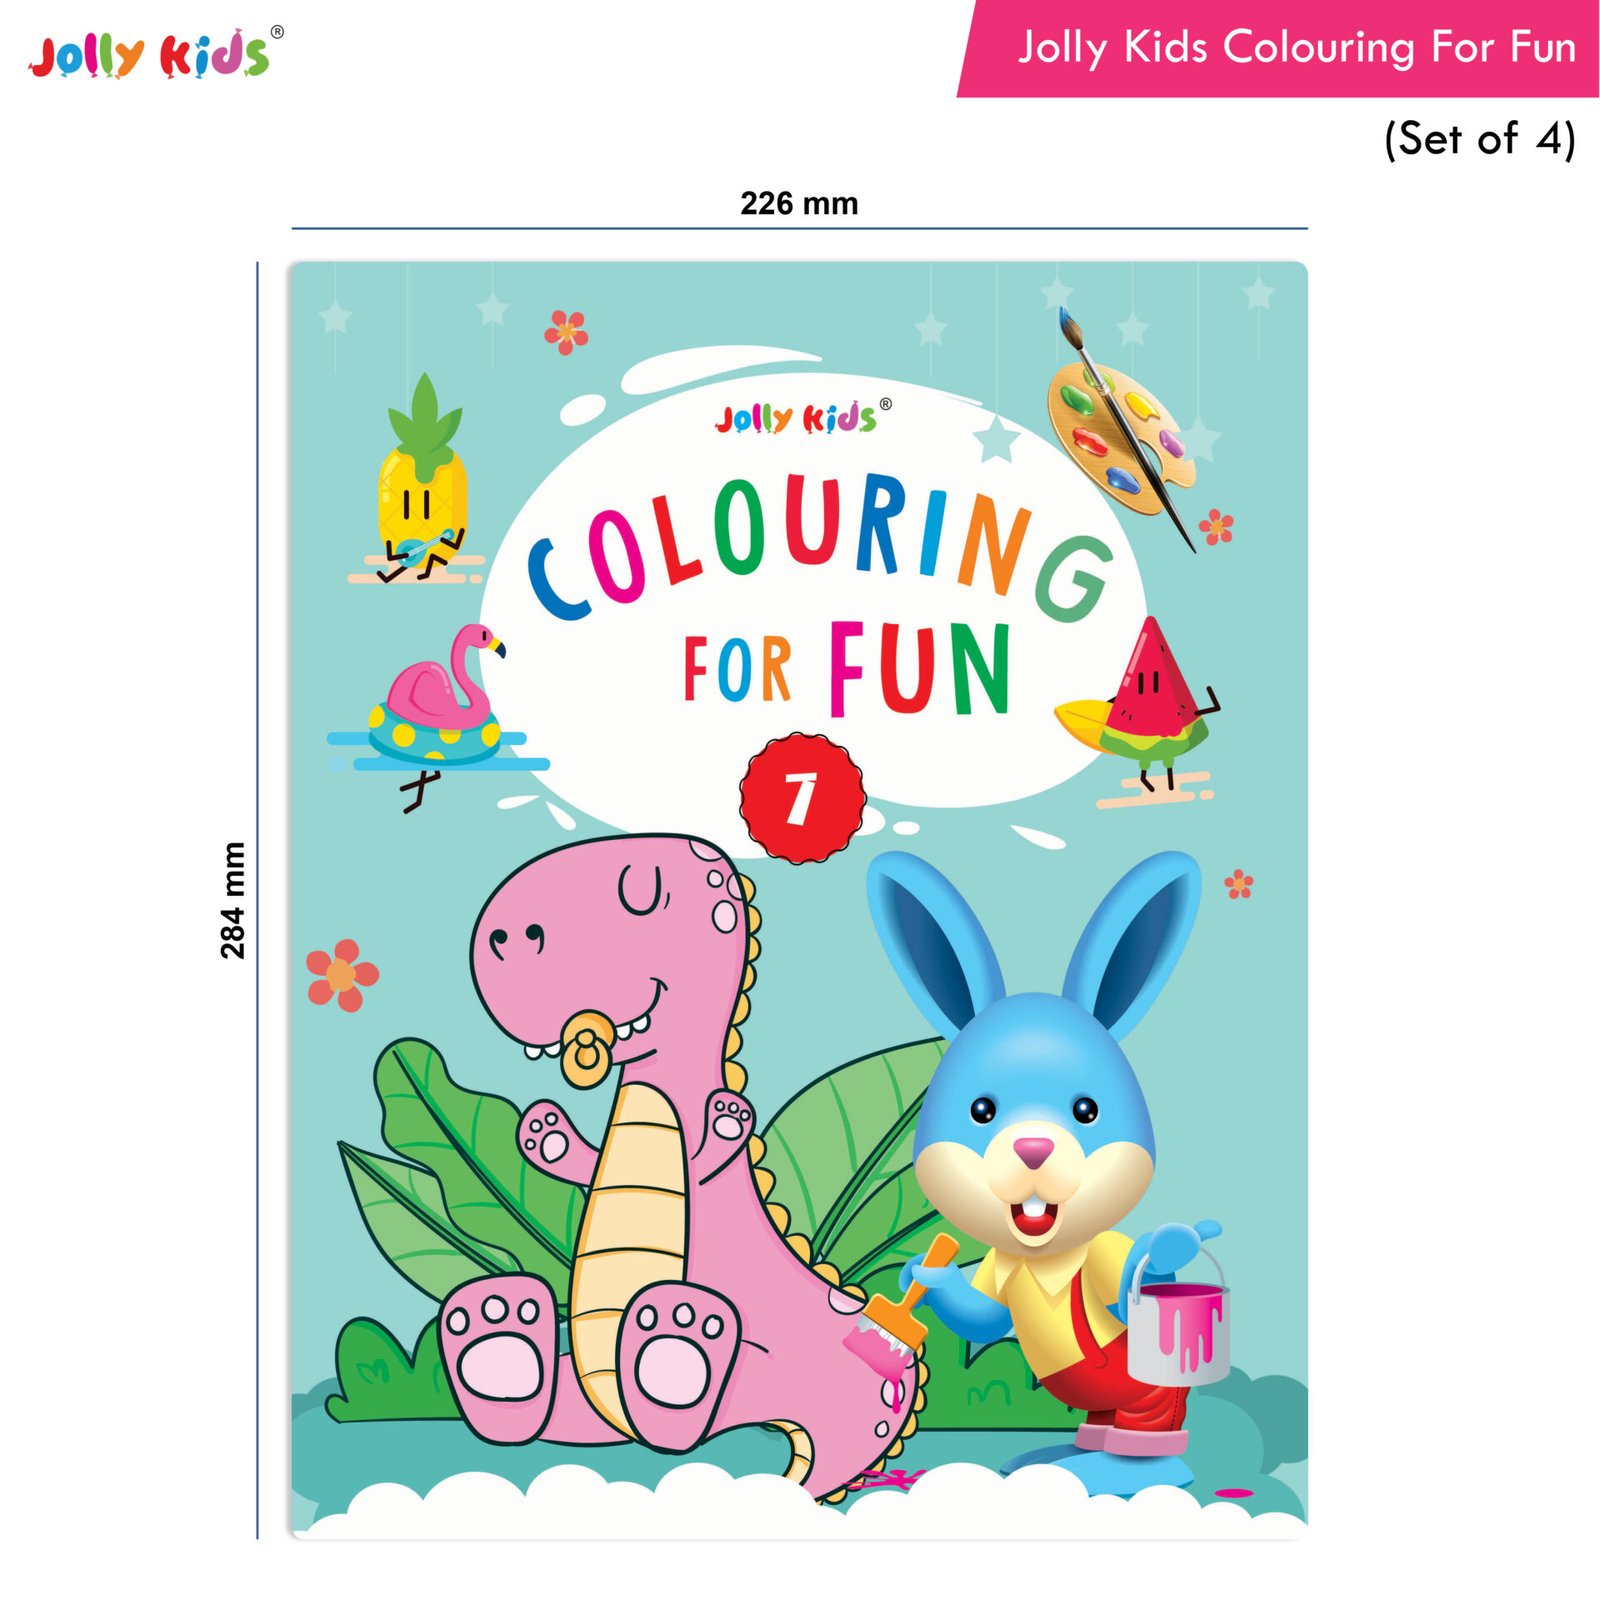 Jolly Kids Colouring For Fun Book Set of 4 5 8 2